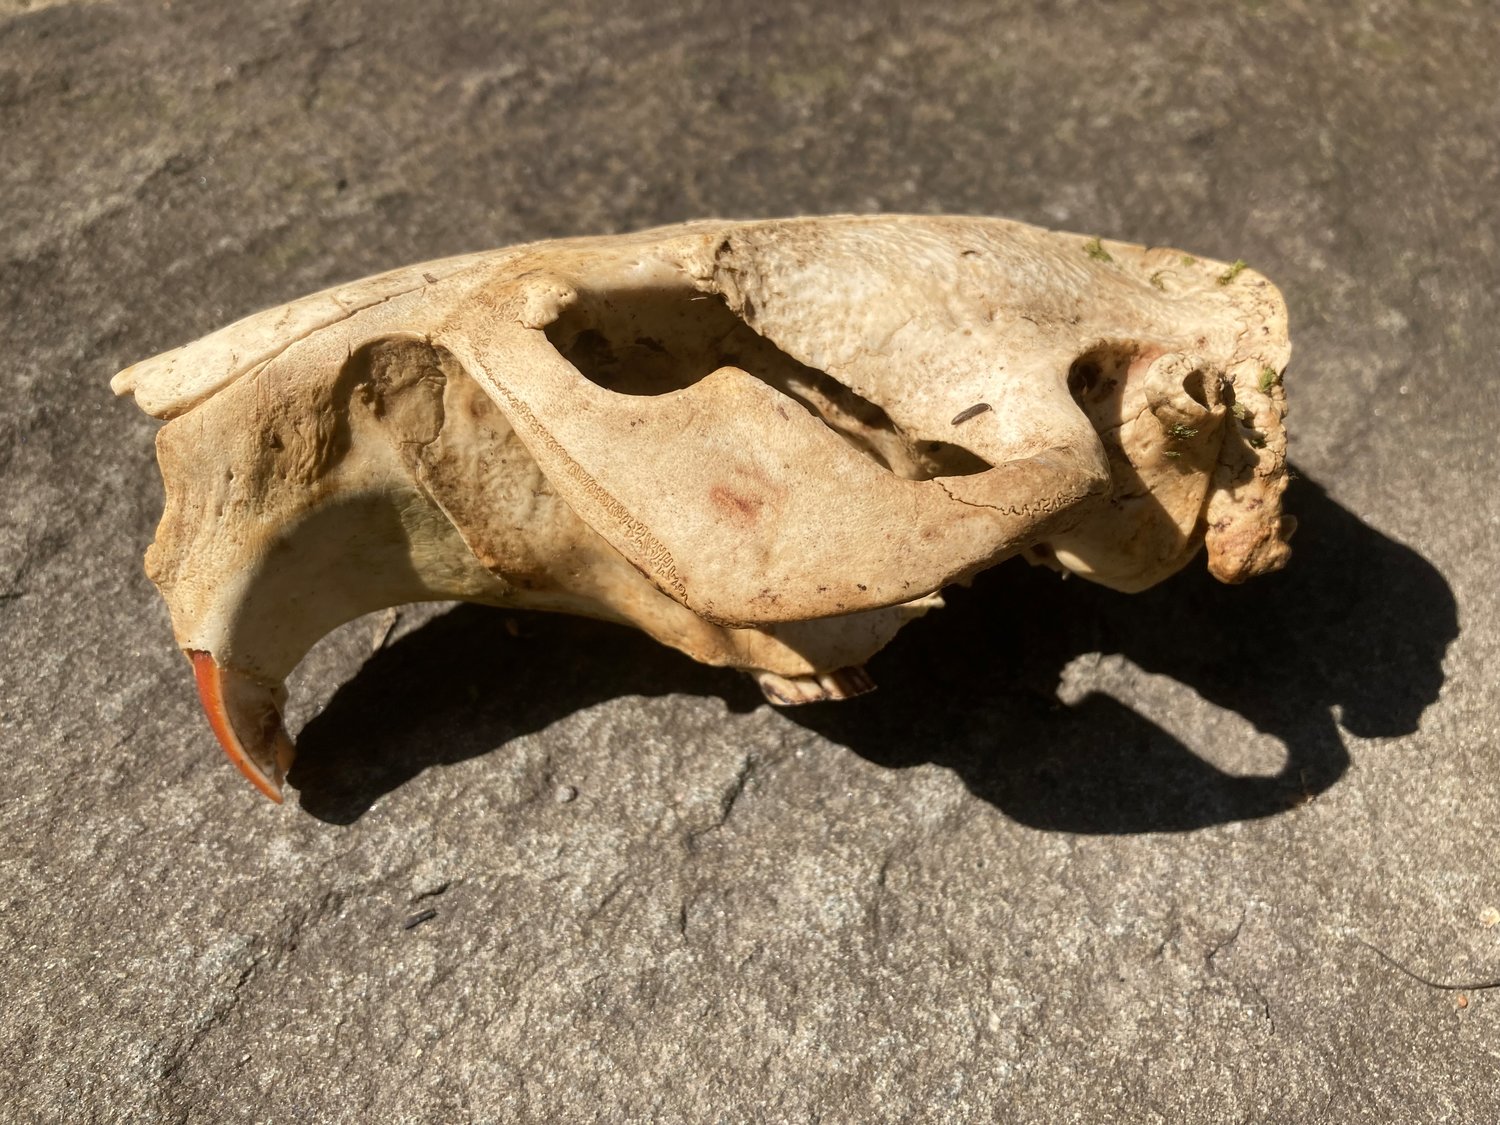 Various views of a beaver skull reveal the prominent incisors that these mammals use to fell trees for constructing dams and lodges and to harvest the inner (cambrium) layer of bark that provides more nourishment to them.